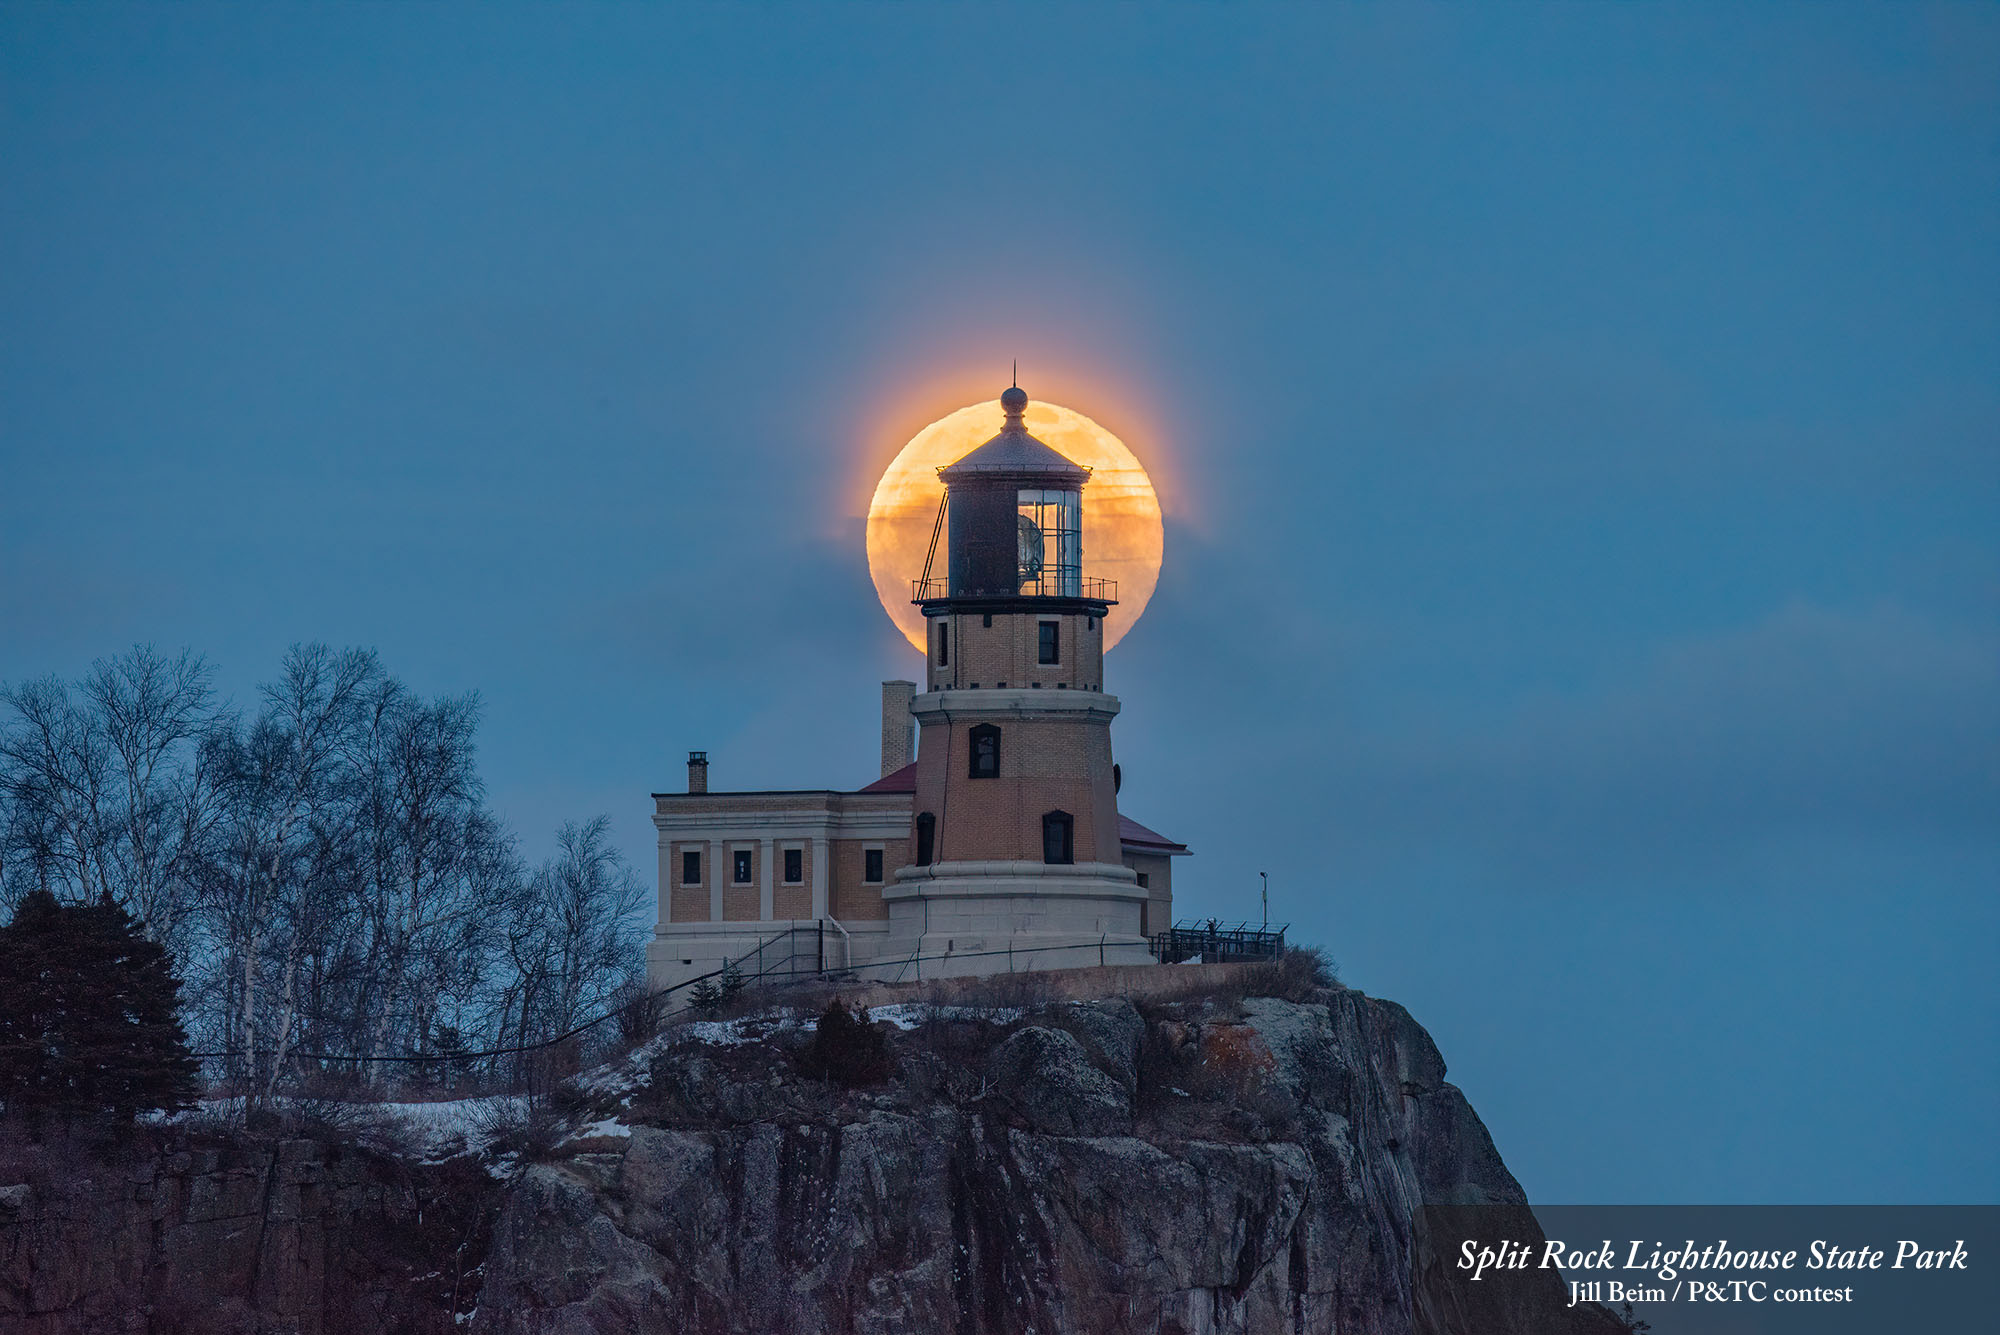 Full moon shining behind a lighthouse